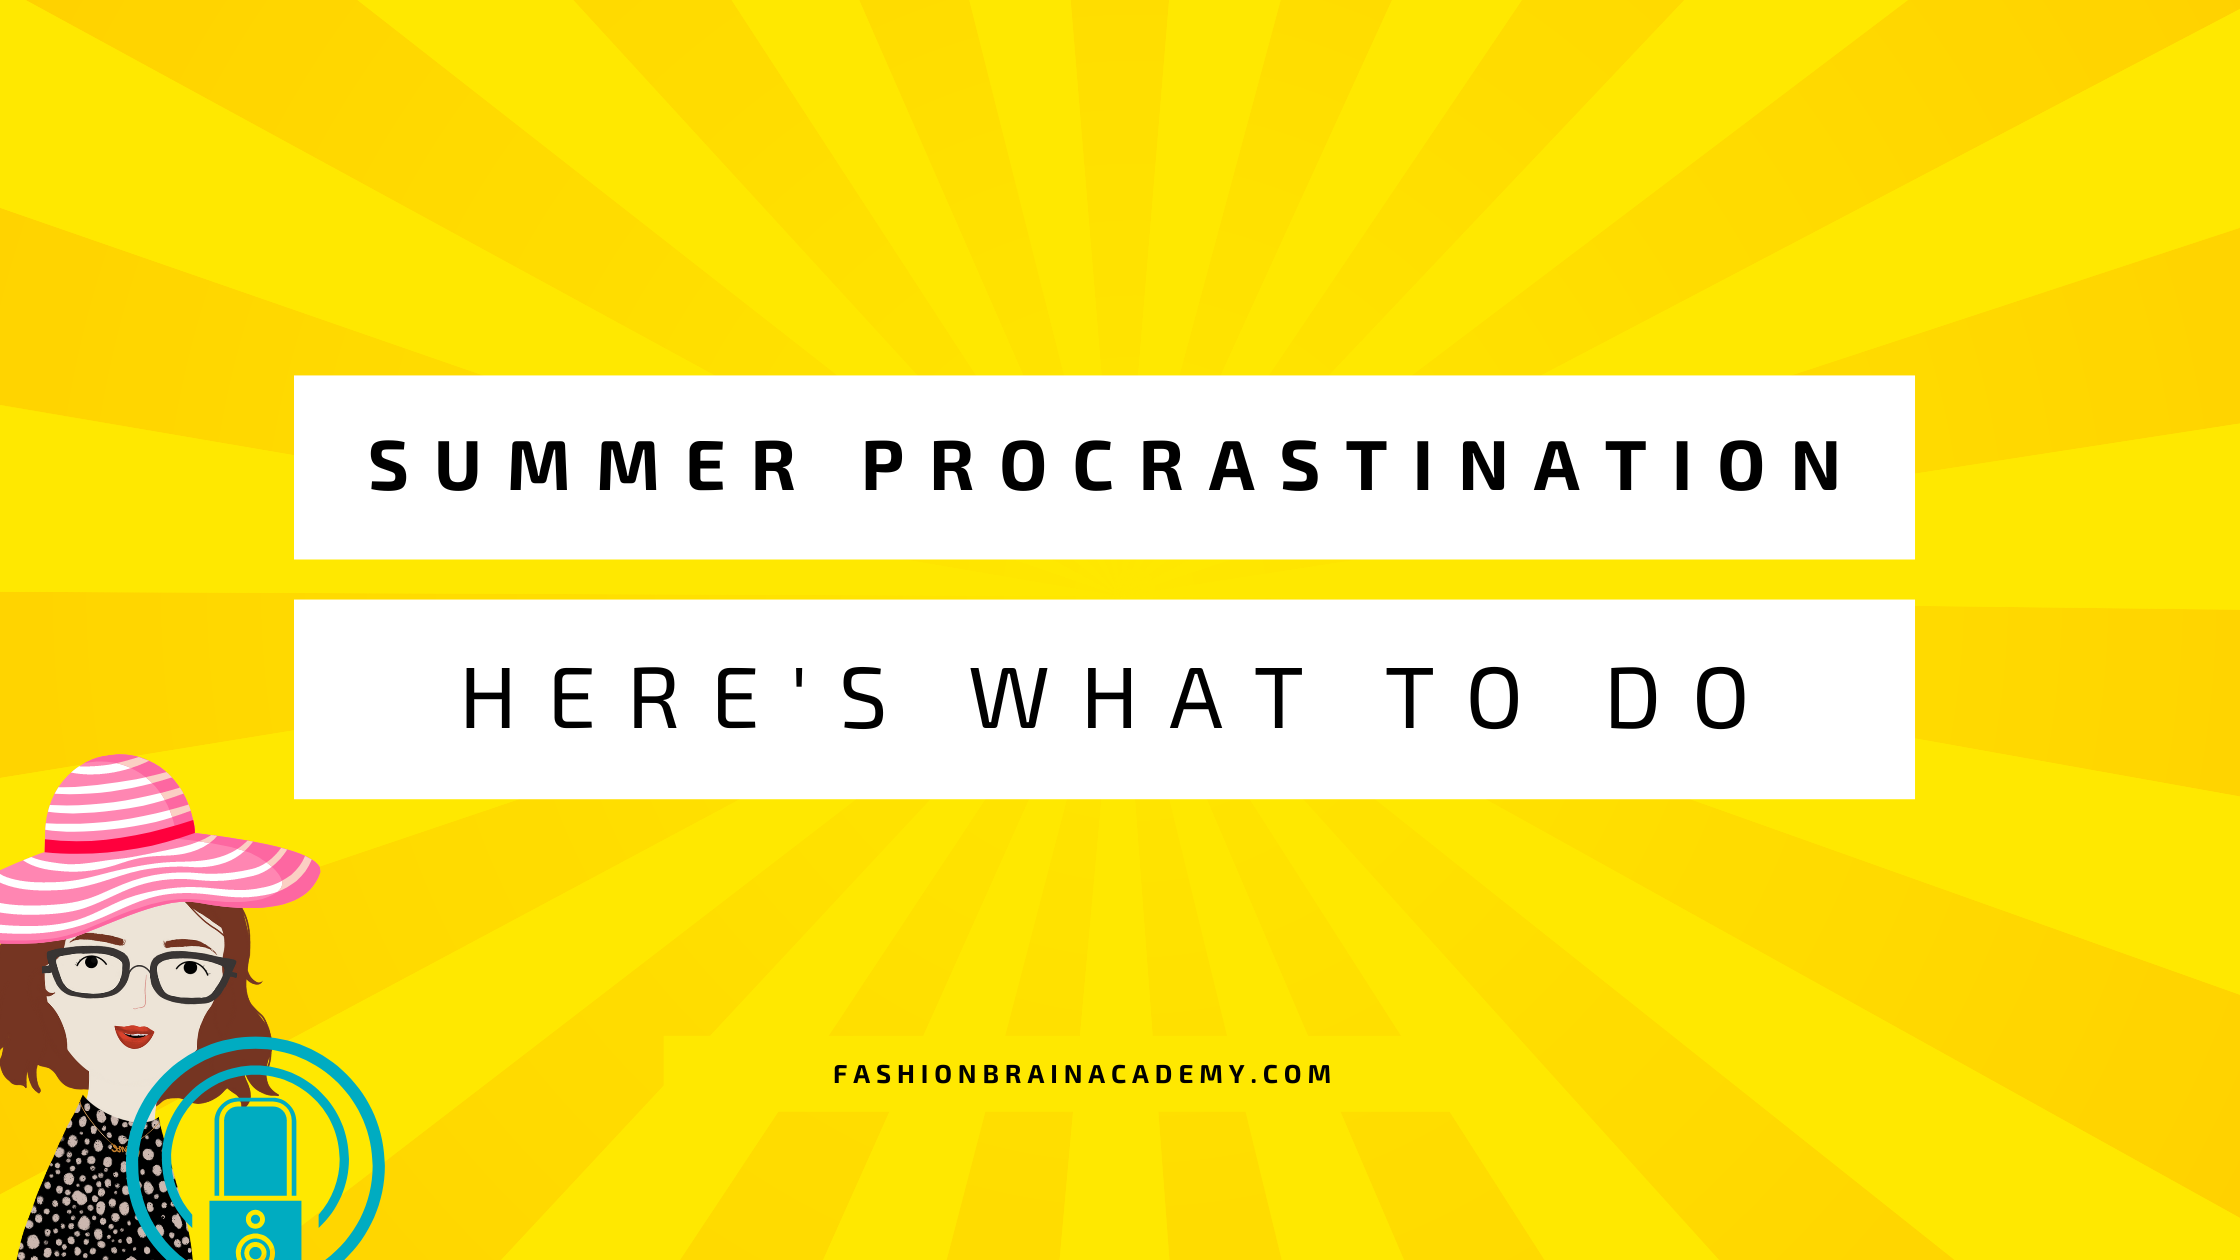 Summer Procrastination - Here's What To Do